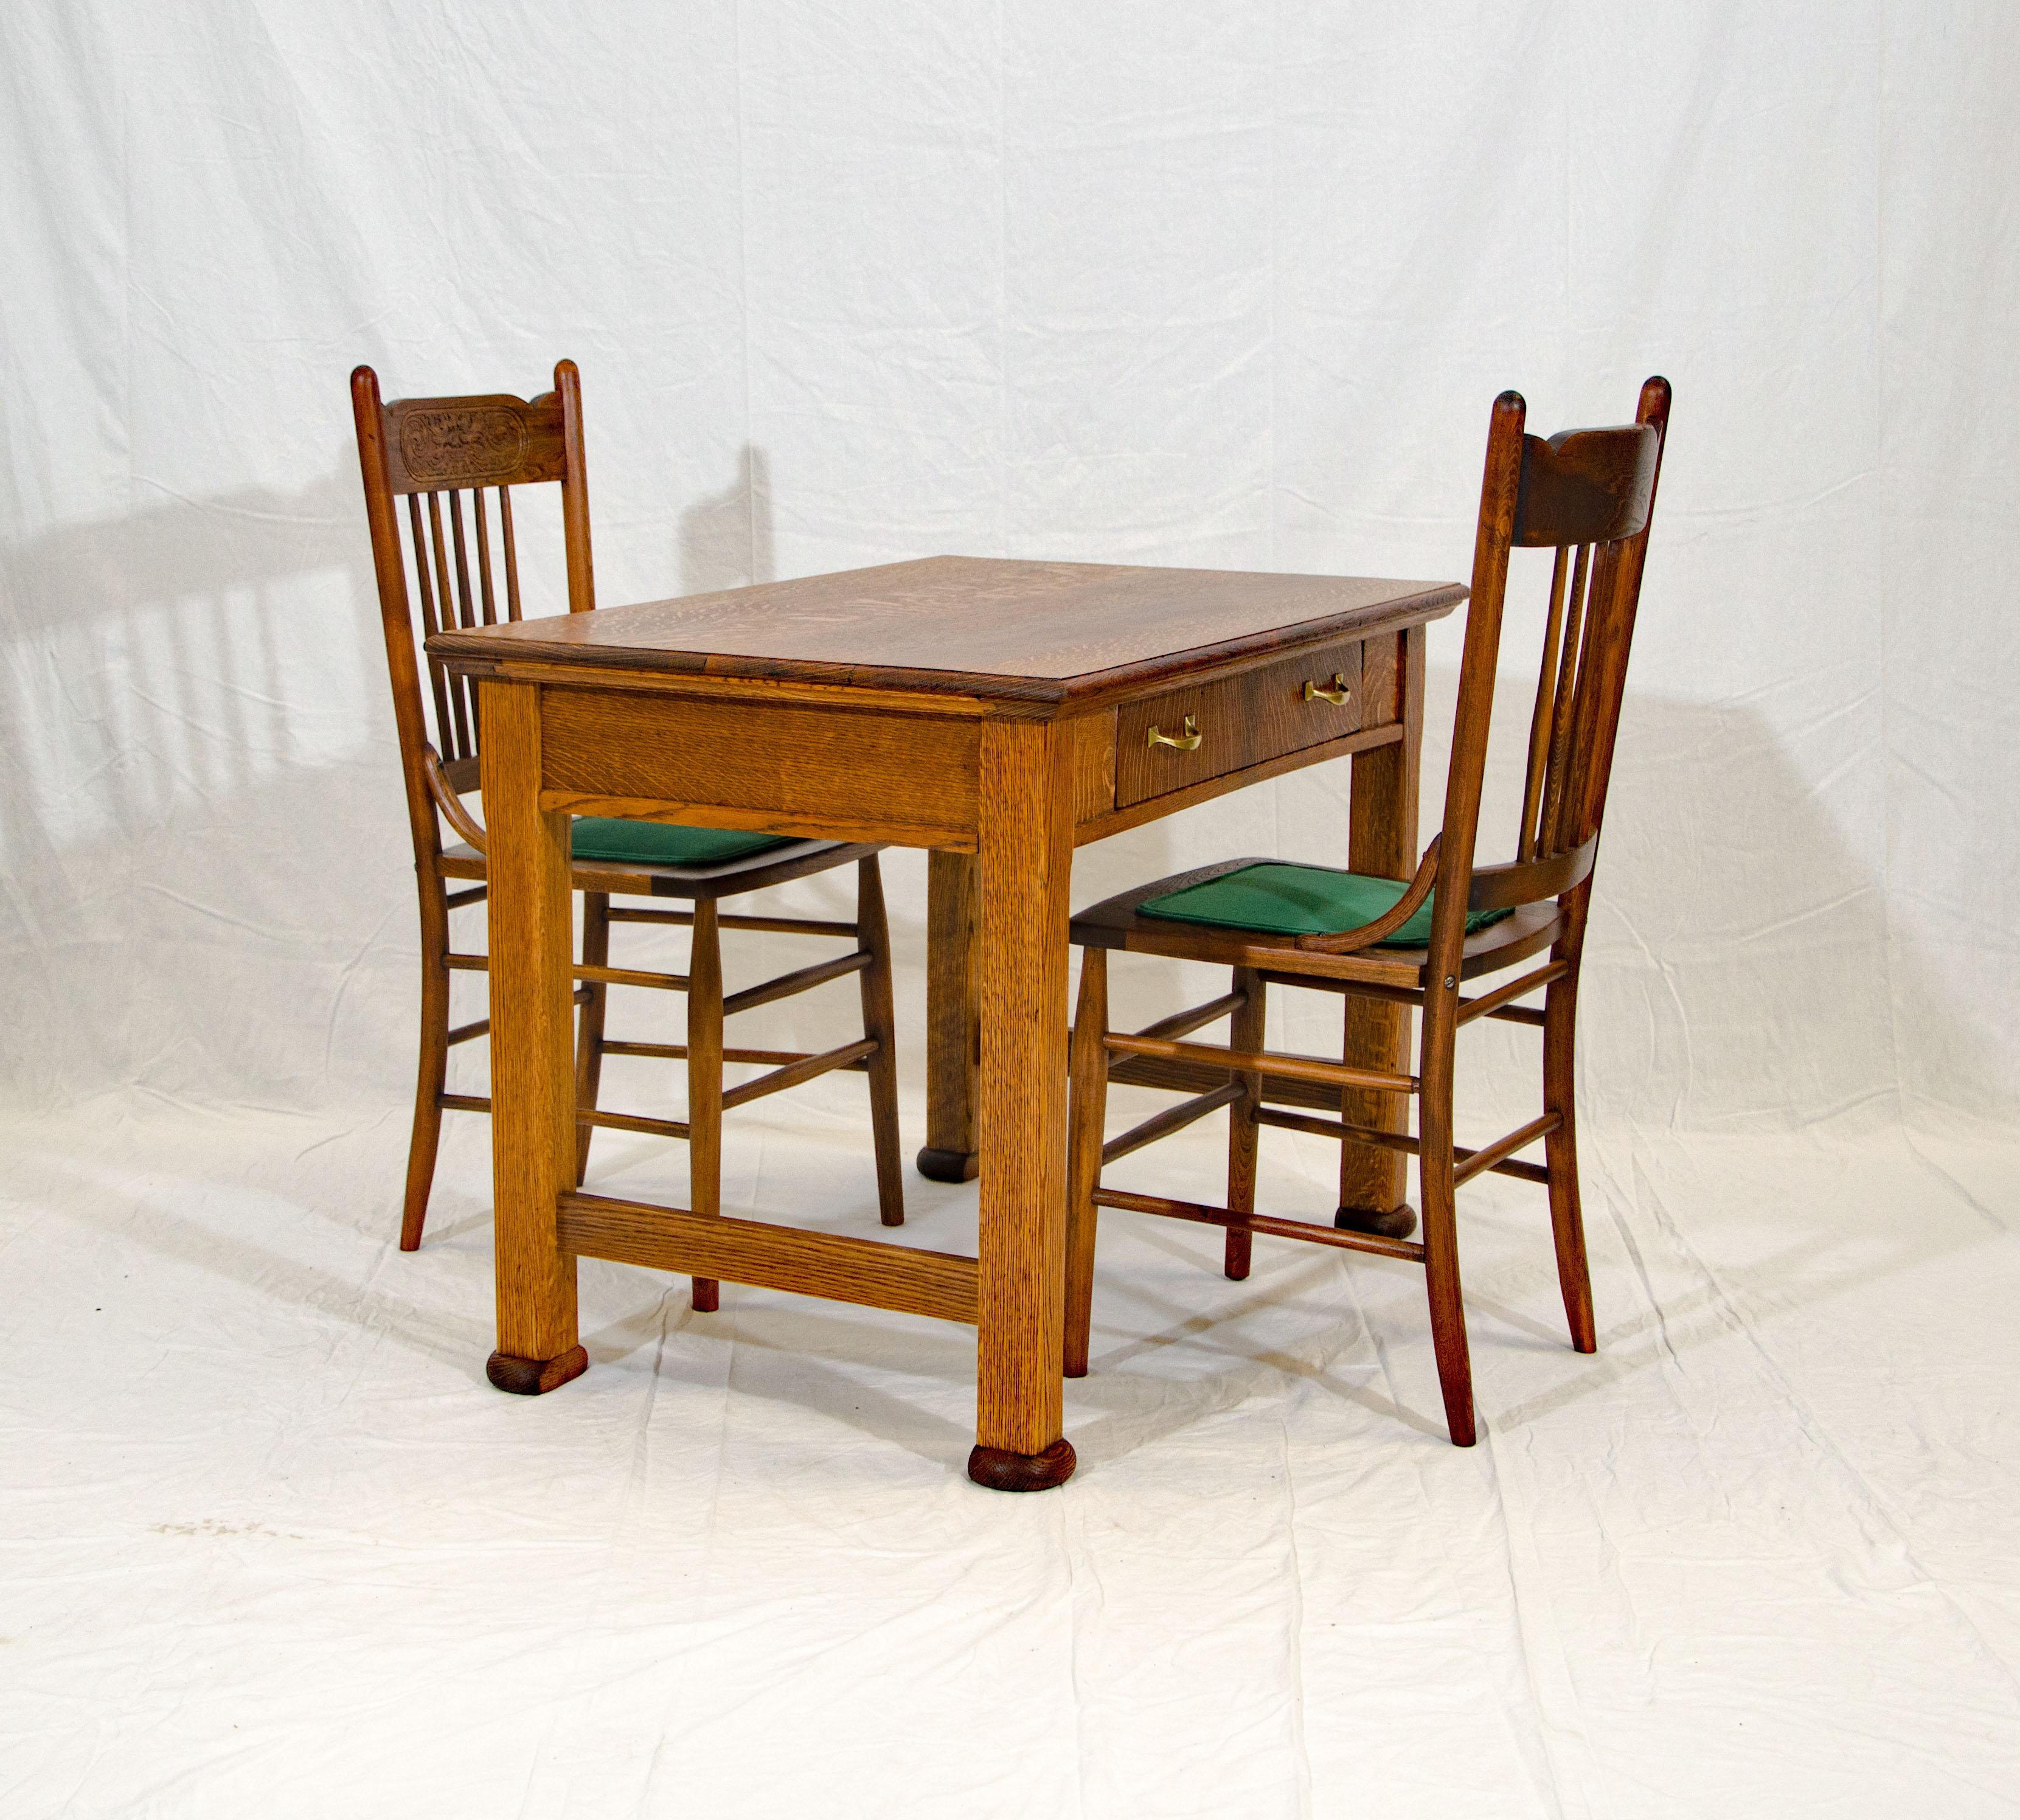 A nice quarter-sawn oak desk or library table and two pressback chairs with the face of the north wind on the back. This table could also be used as a breakfast table in a small kitchen space. The drawer interior height is 3